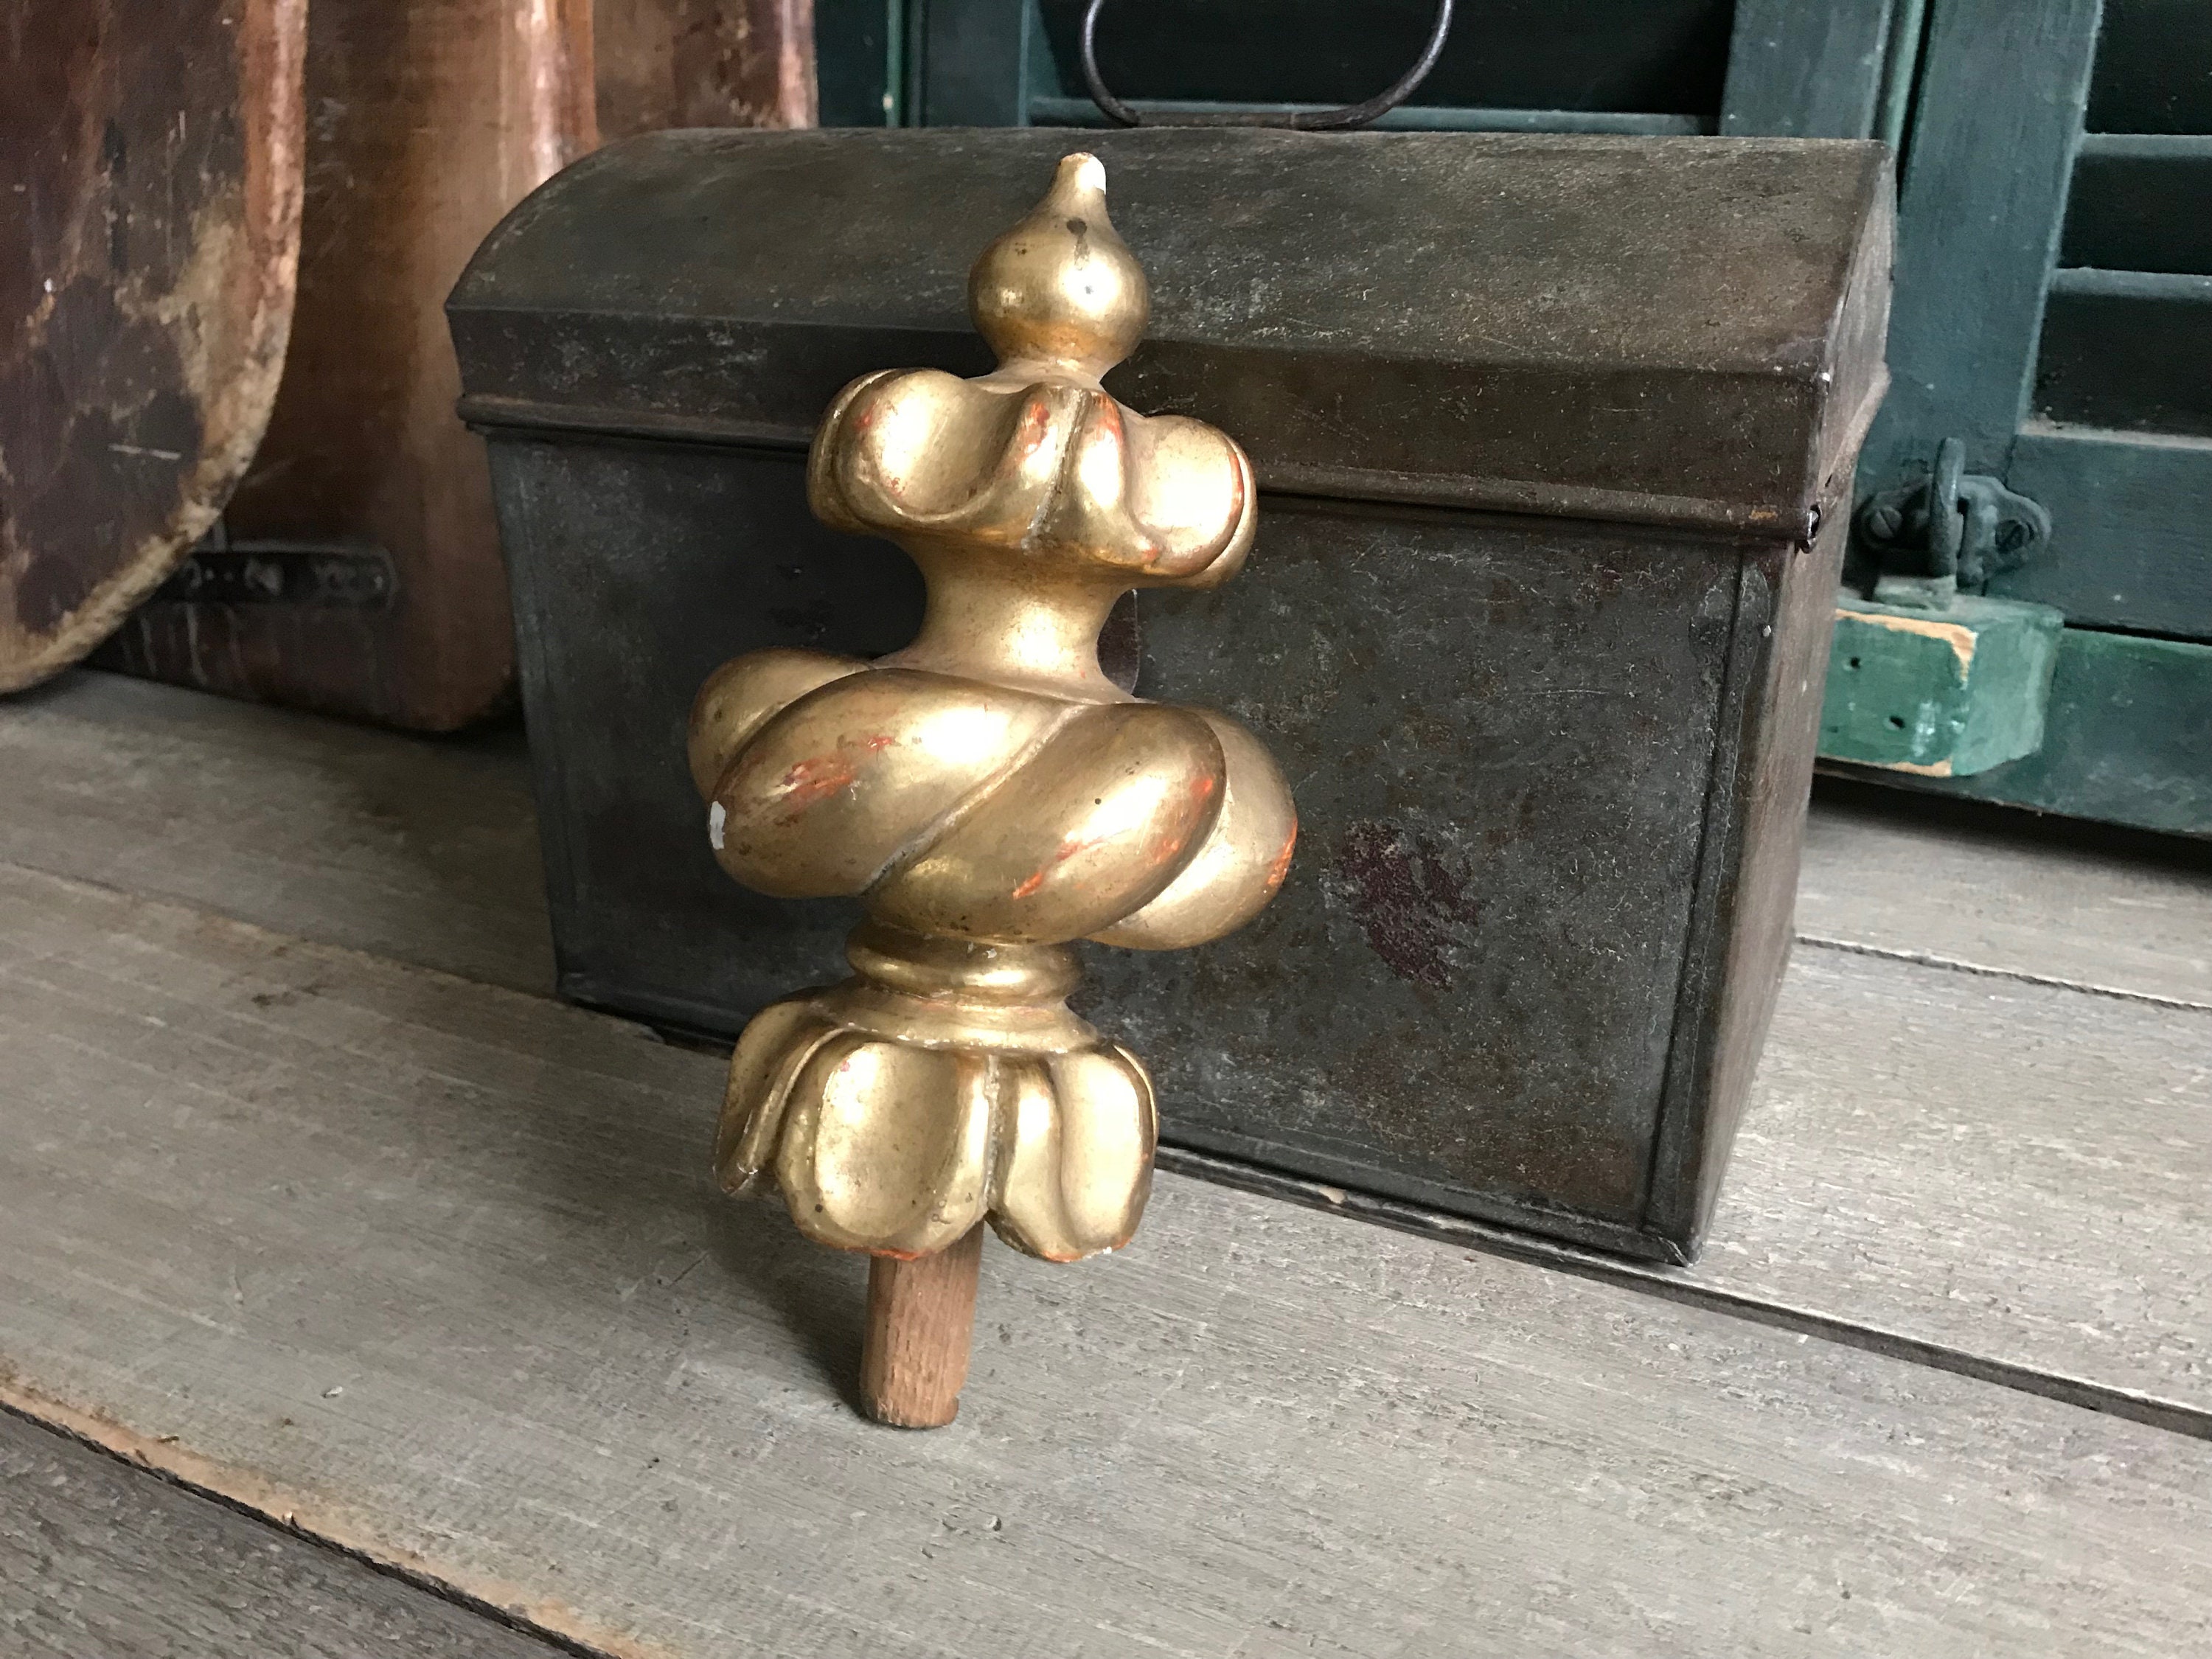 Wood Finials, Wood Furniture Parts, Architectural Salvage, Vintage Rec –  The Old Grainery